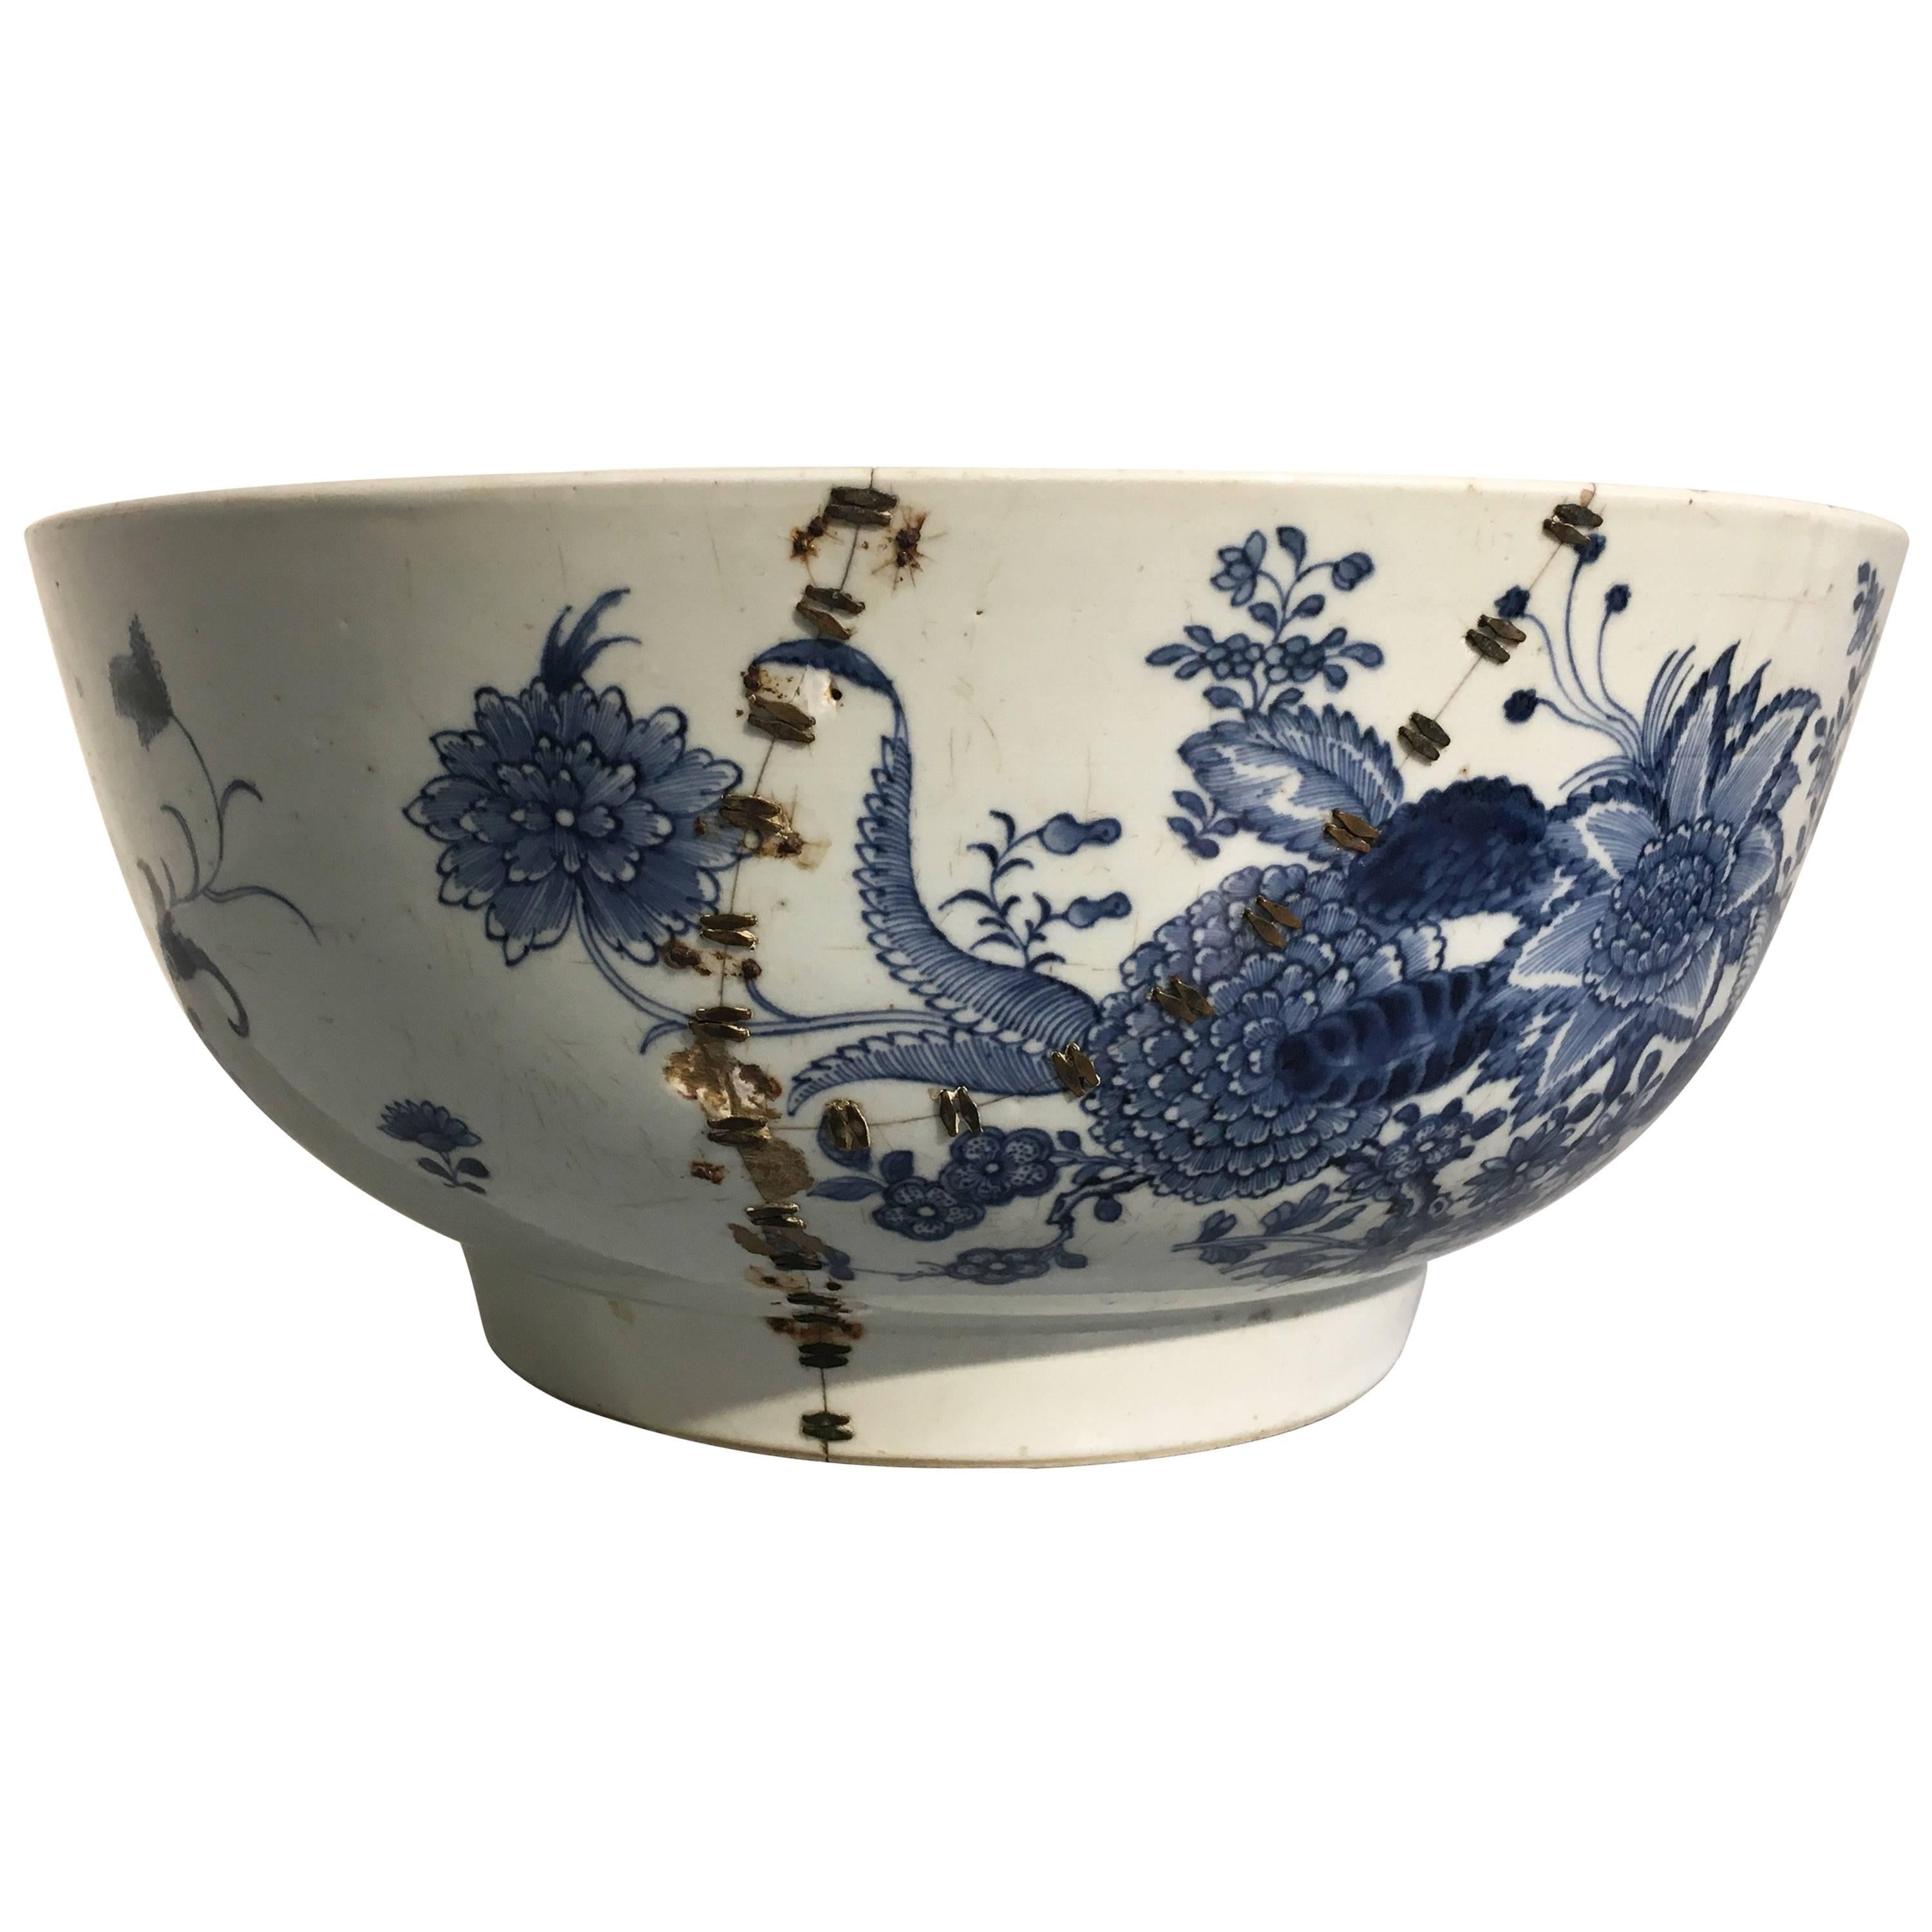 Large Chinese Export Punchbowl with Staple Repairs, 18th Century